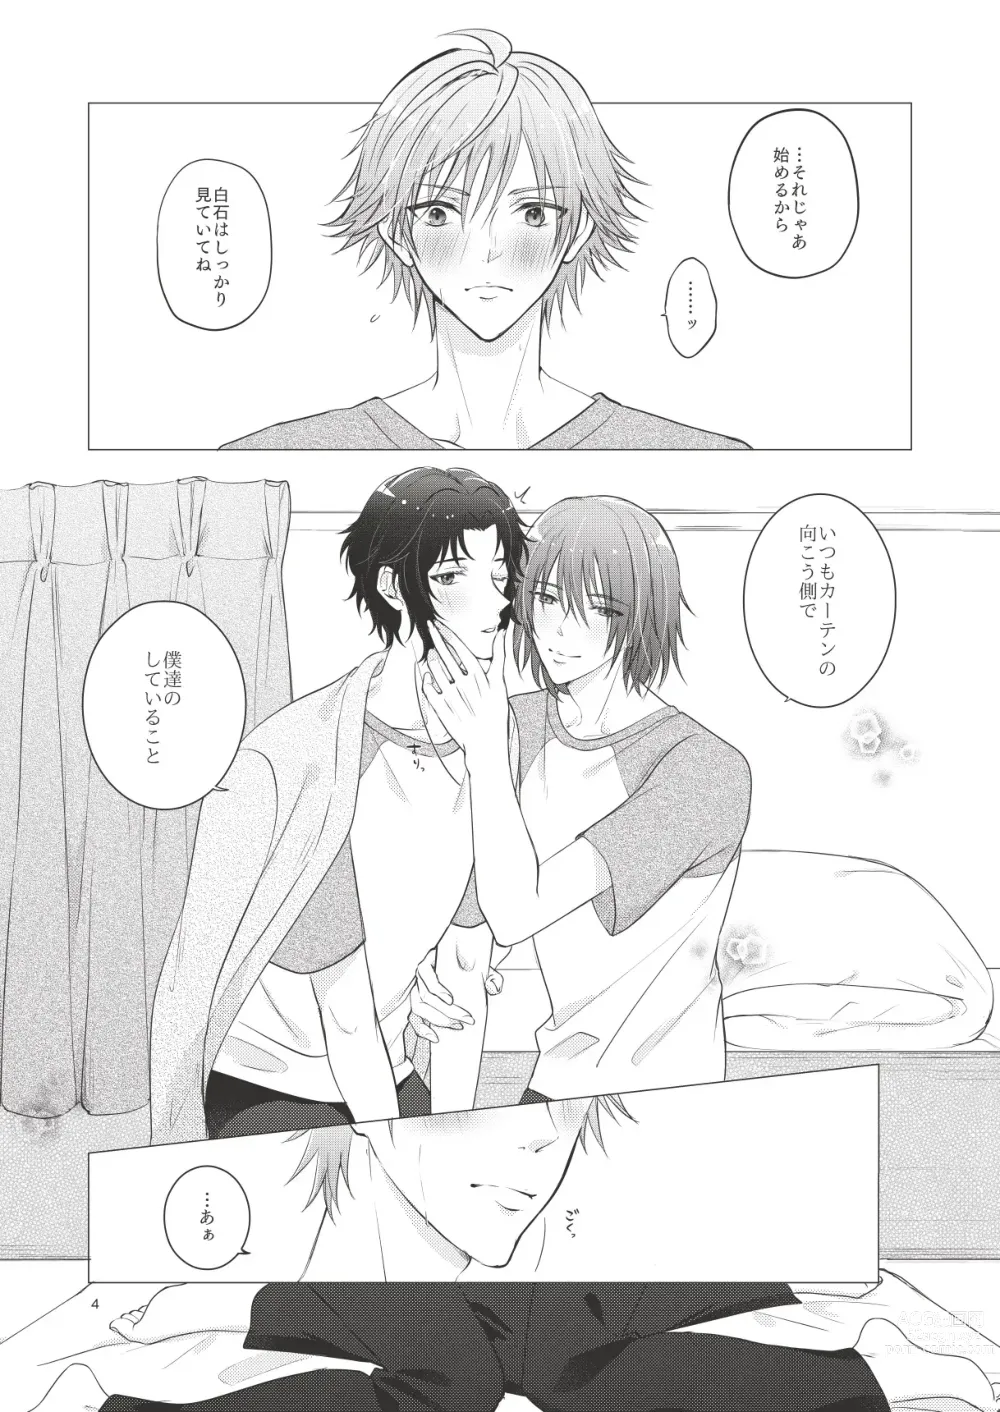 Page 3 of doujinshi Bonds of affection